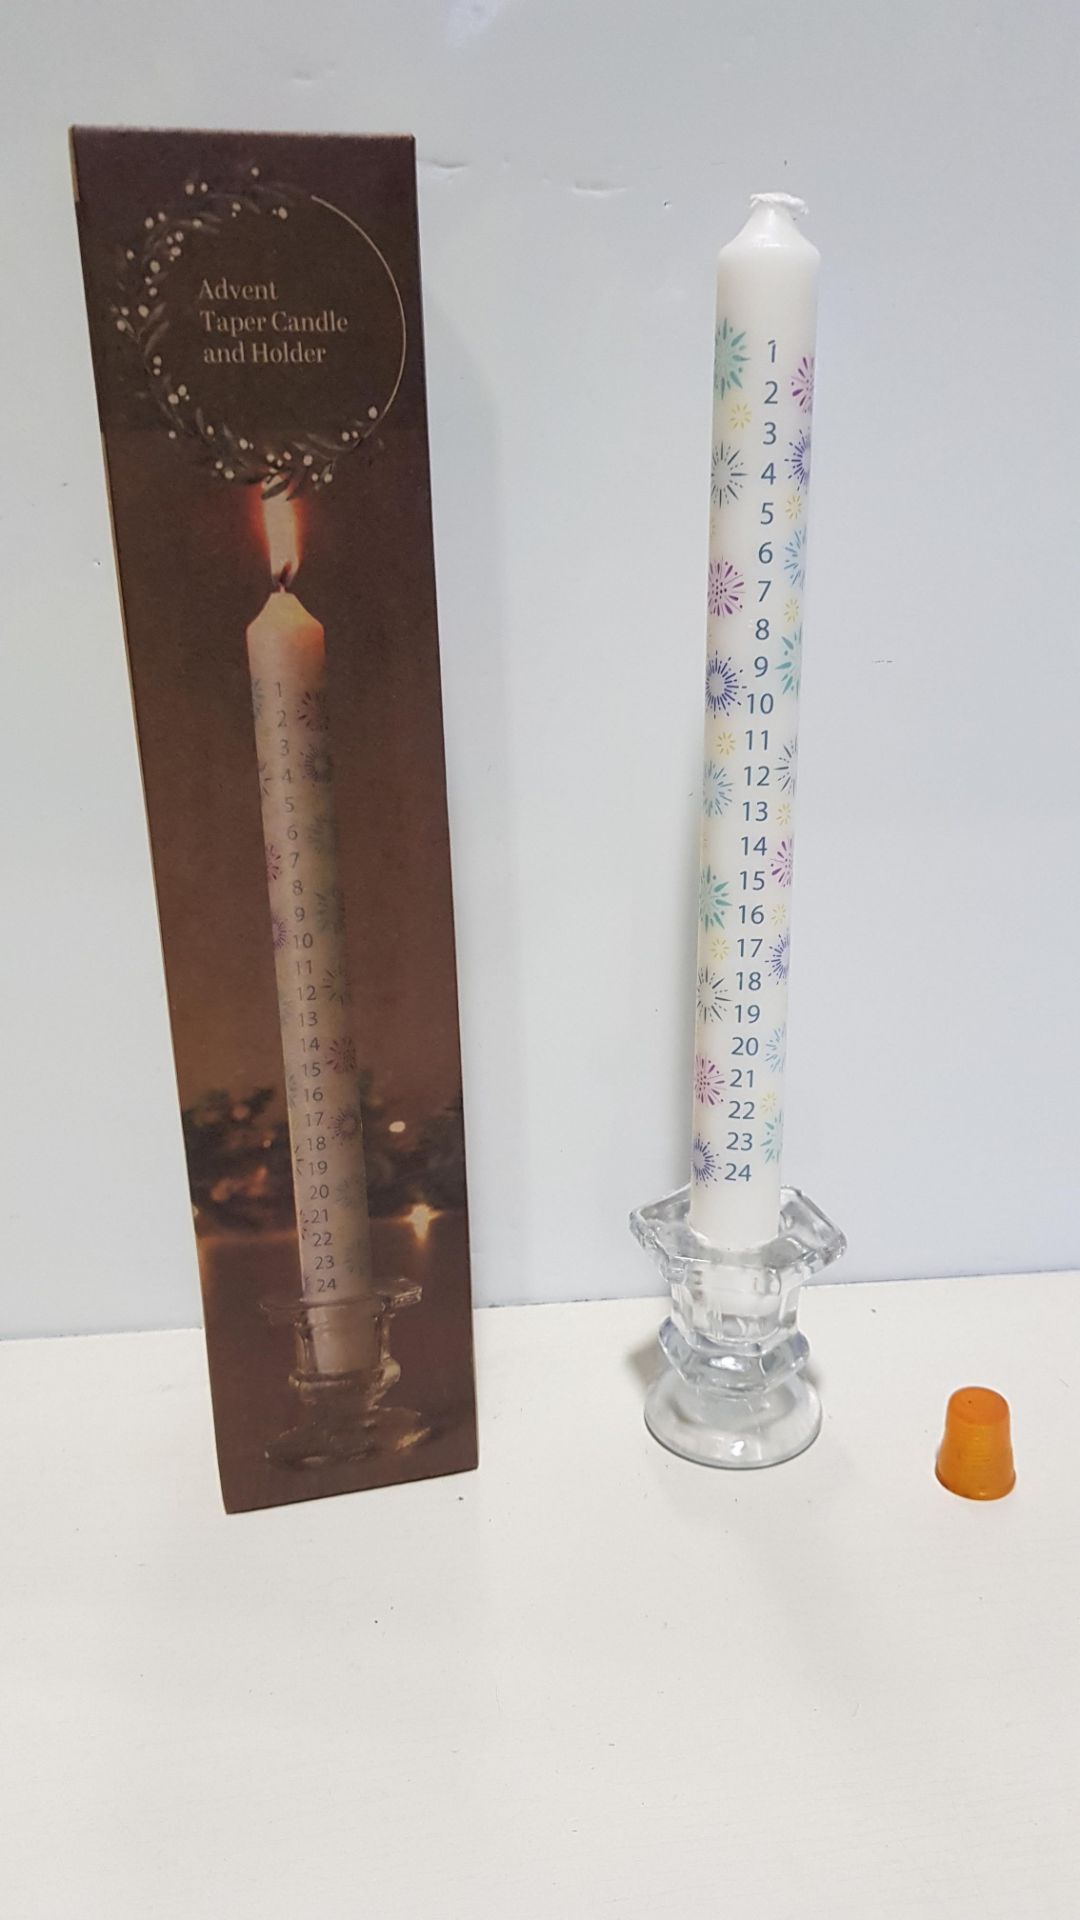 60 X BRAND NEW LAKELAND ADVENT TAPER CANDLE AND HOLDER - SIZE APPROX 5.5CM X 29 CM H - IN 1 BOX